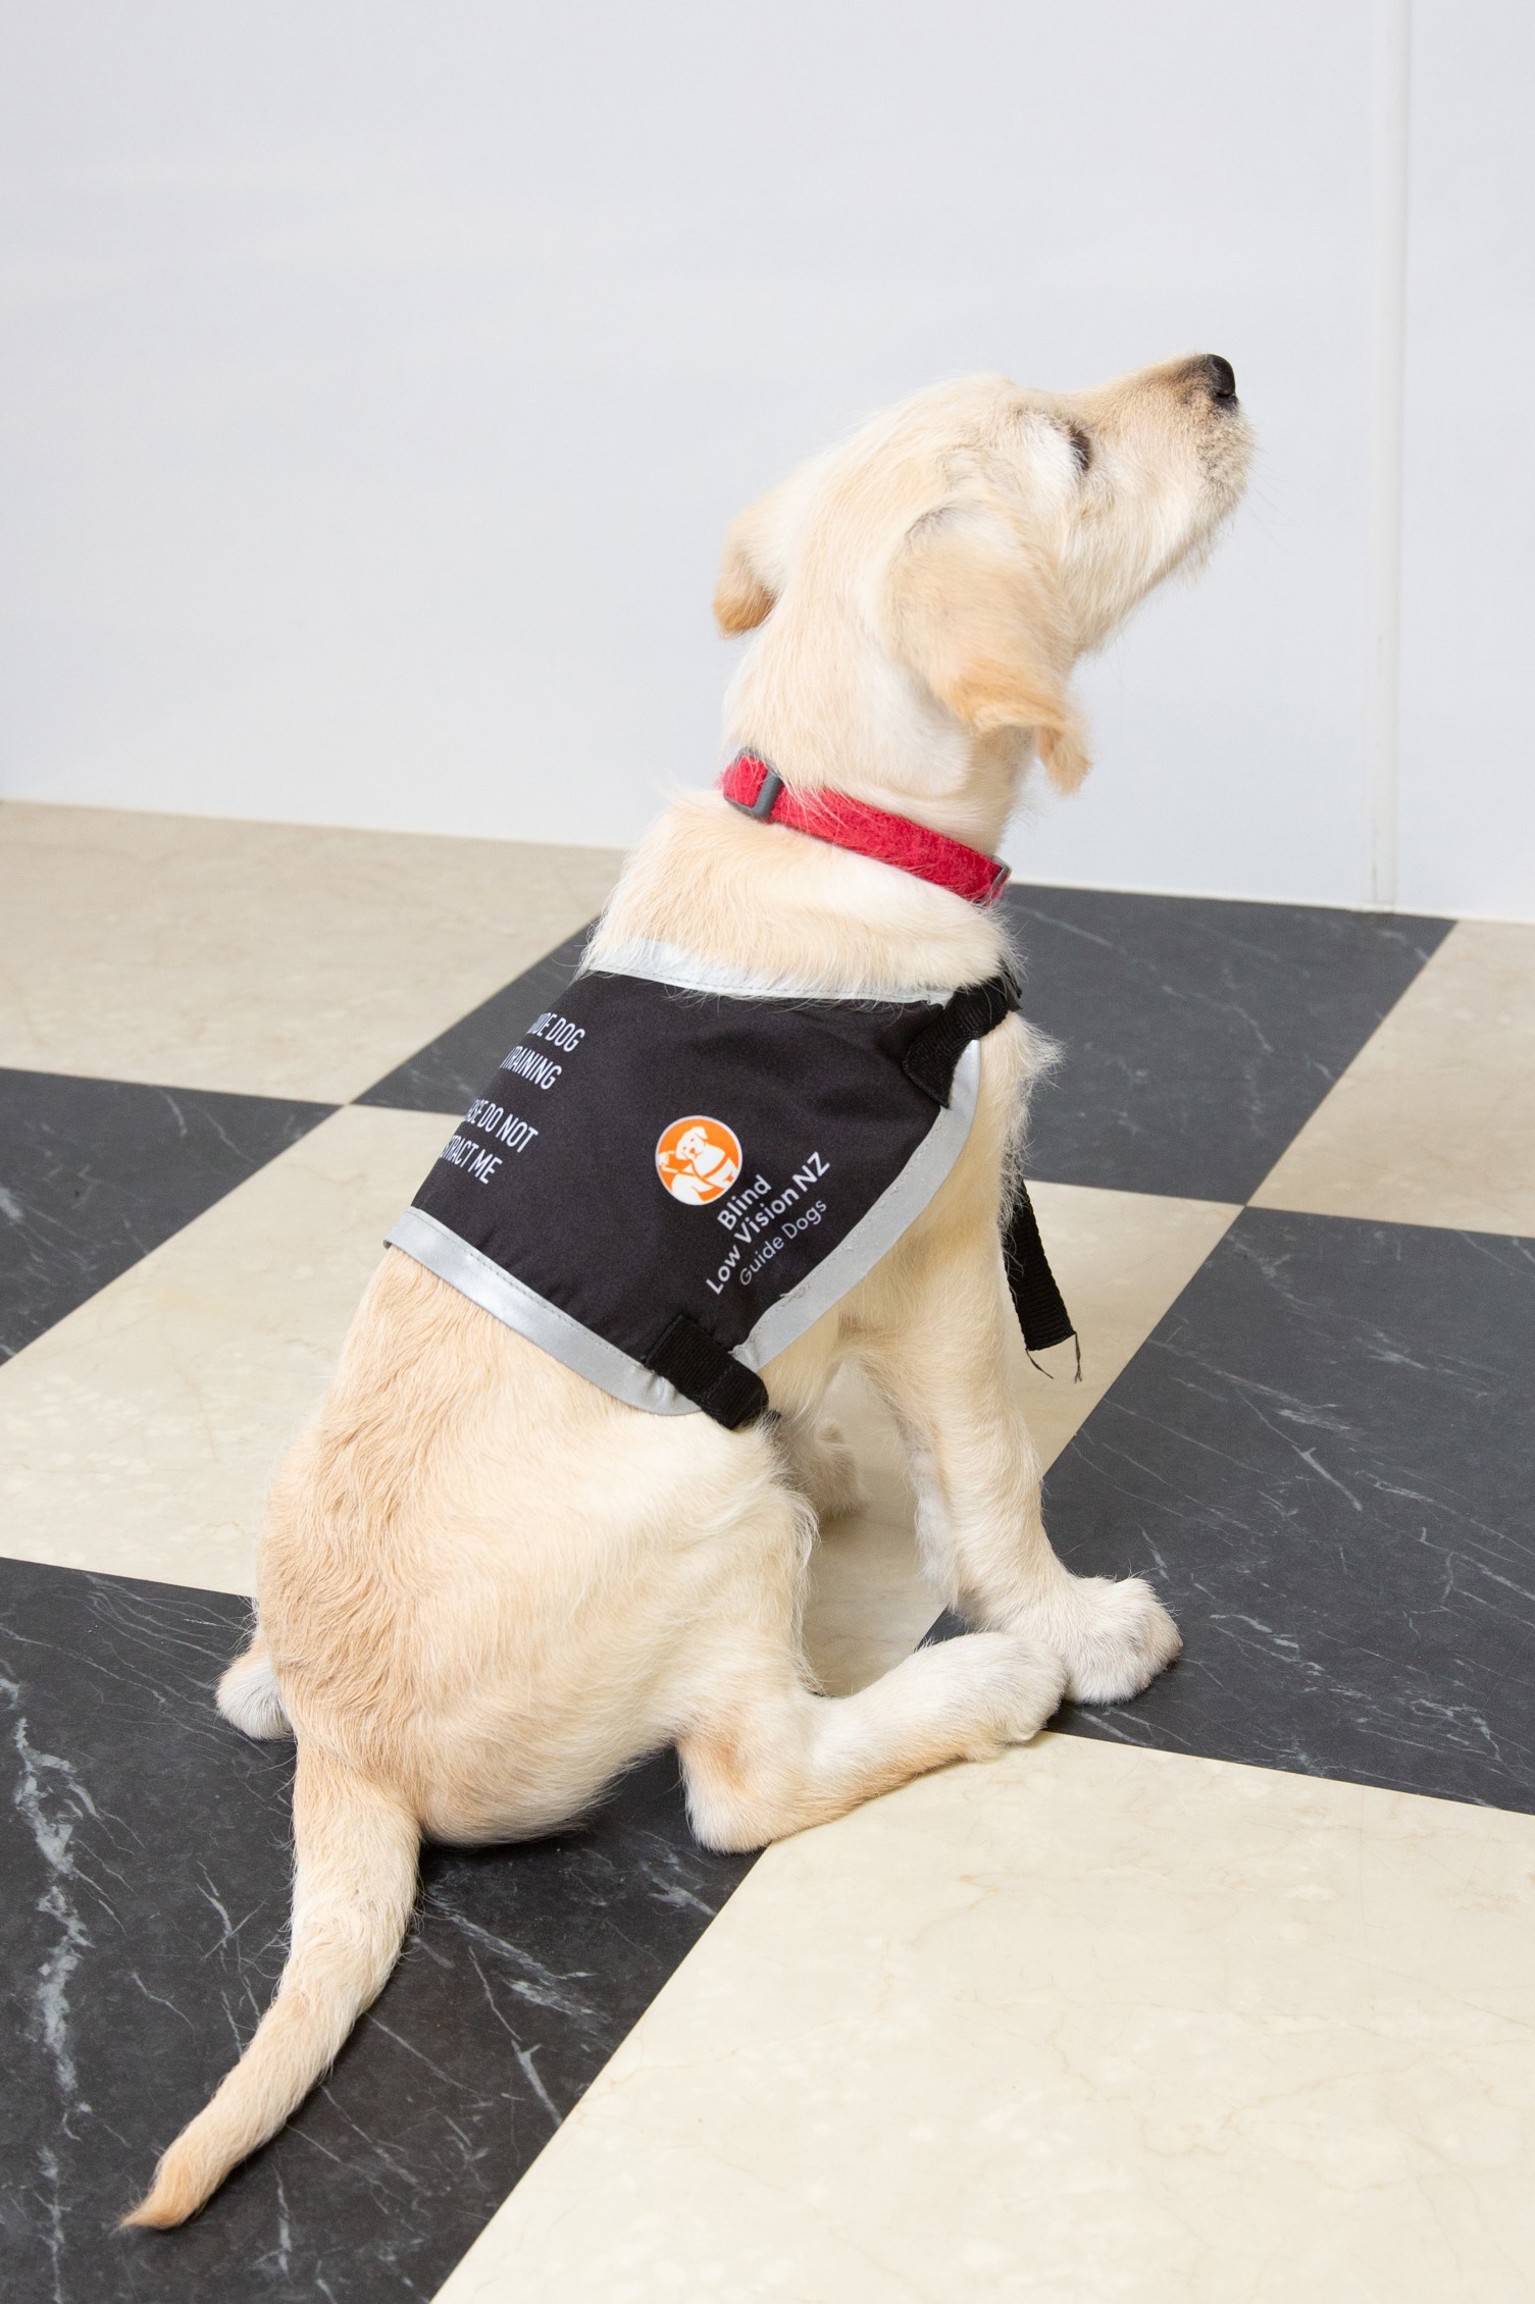 Image showing blind and low vision disability assist dog wearing a vest.